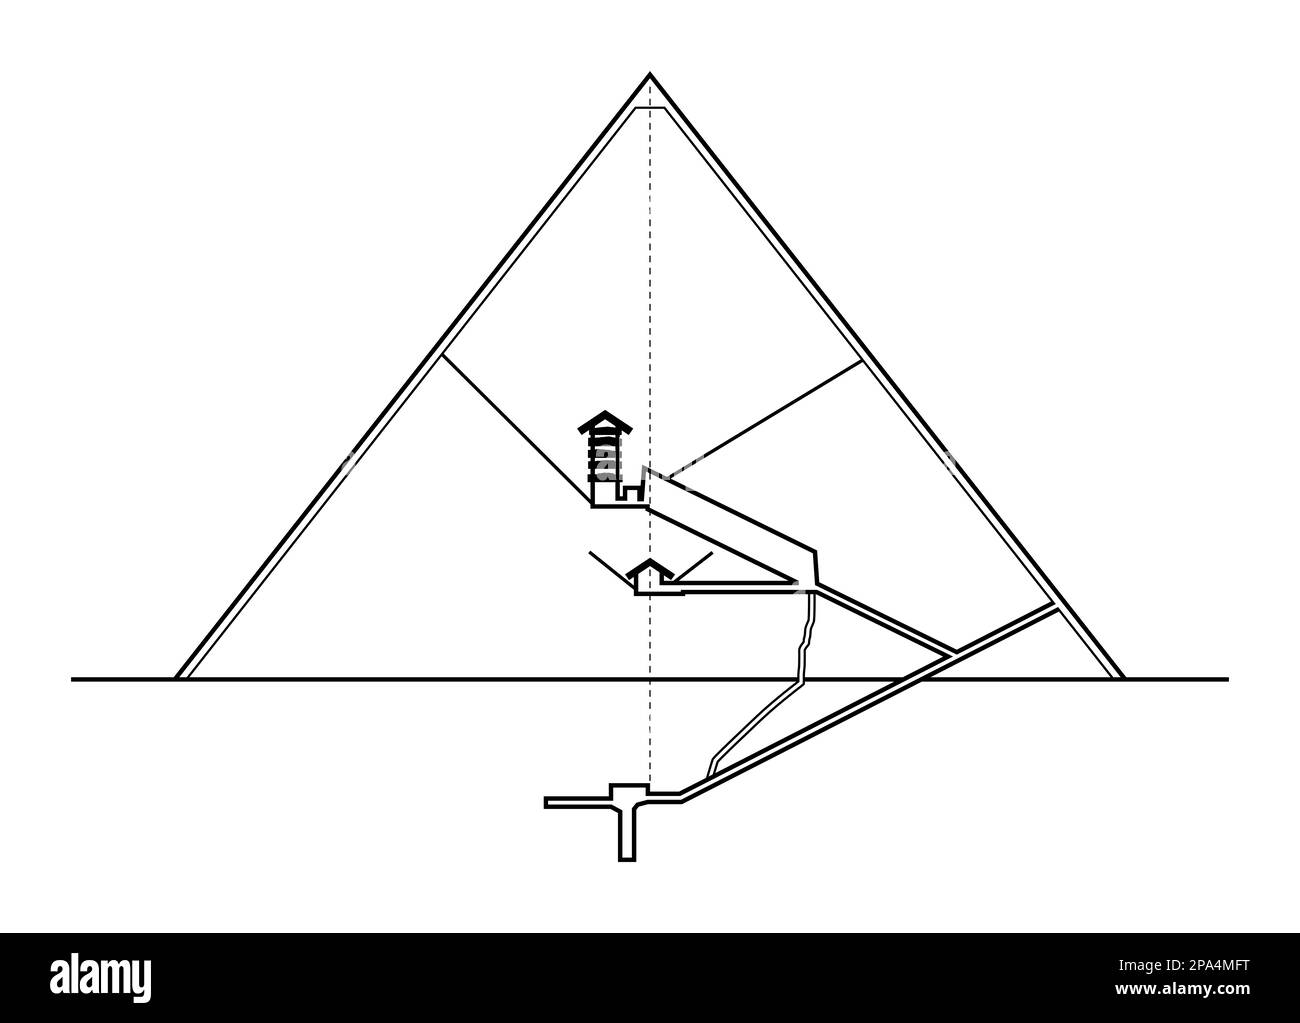 Great Pyramid of Giza, vertical section, viewed from the East. Elevation diagram of the interior structures of the largest pyramid in Egypt. Stock Photo